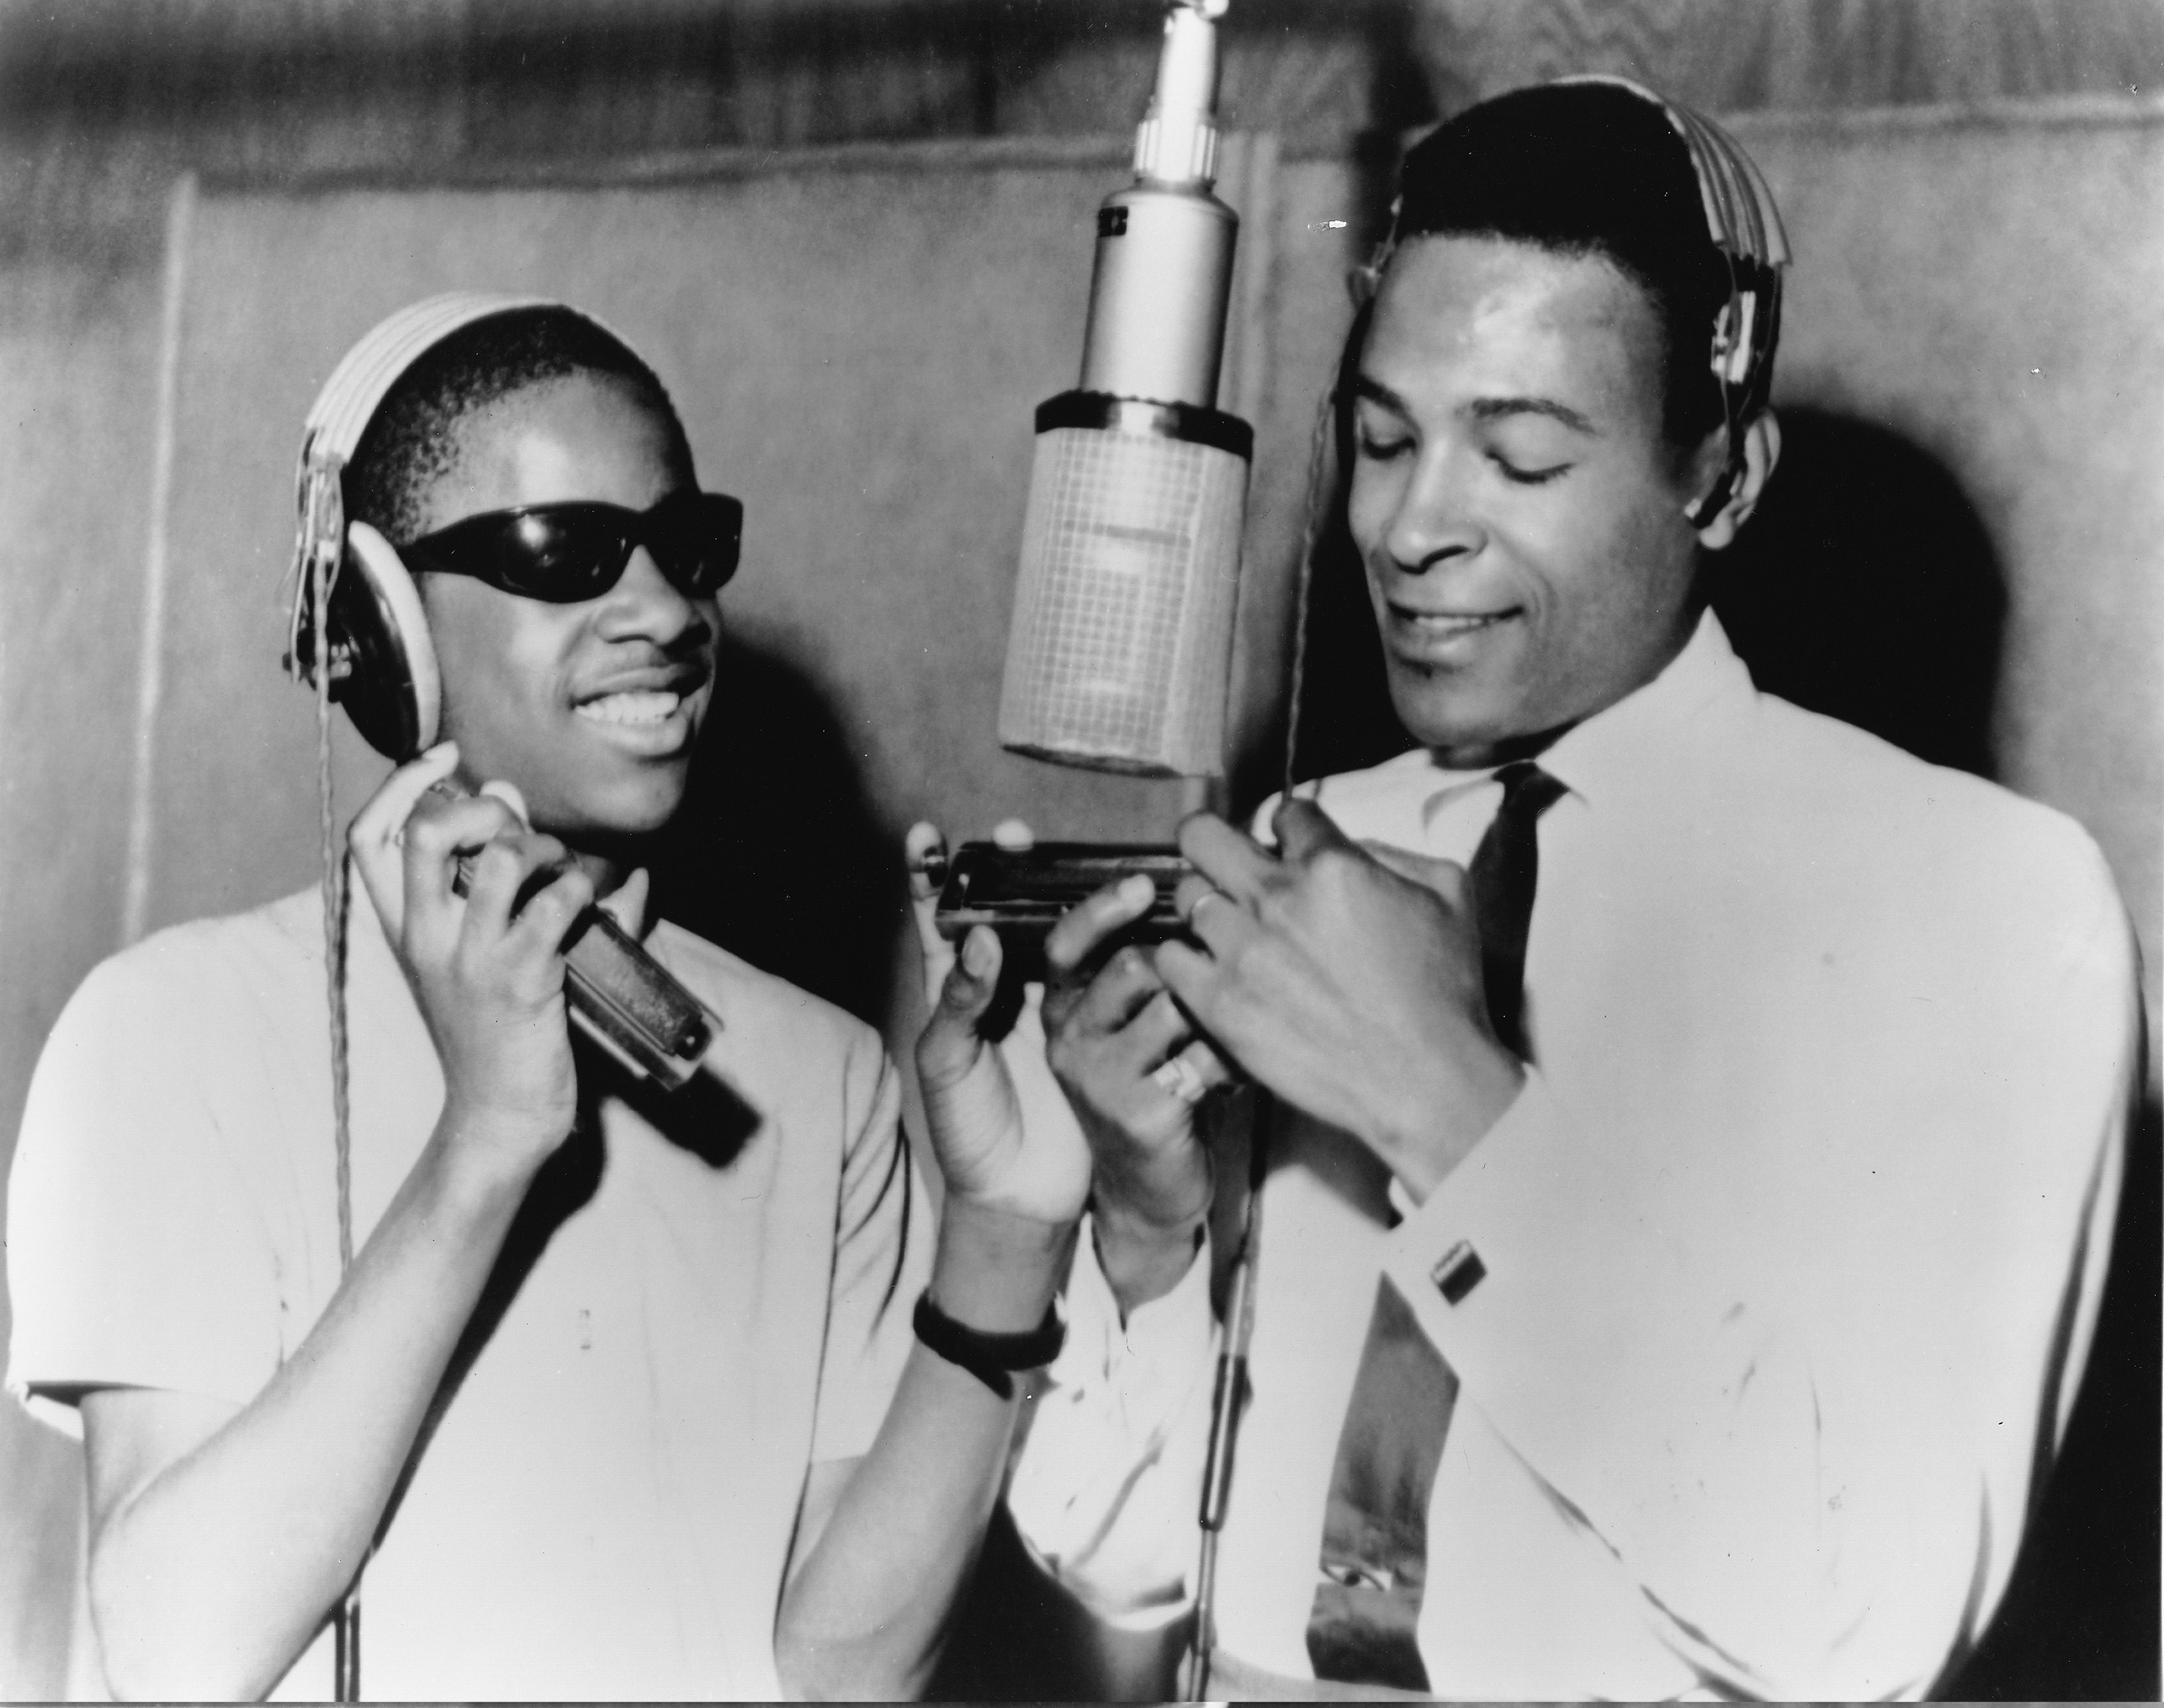 Stevie Wonder, left, with Marvin Gaye in a Motown studio in Detroit in 1965. Founder Berry Gordy came to see the label as a force for integration